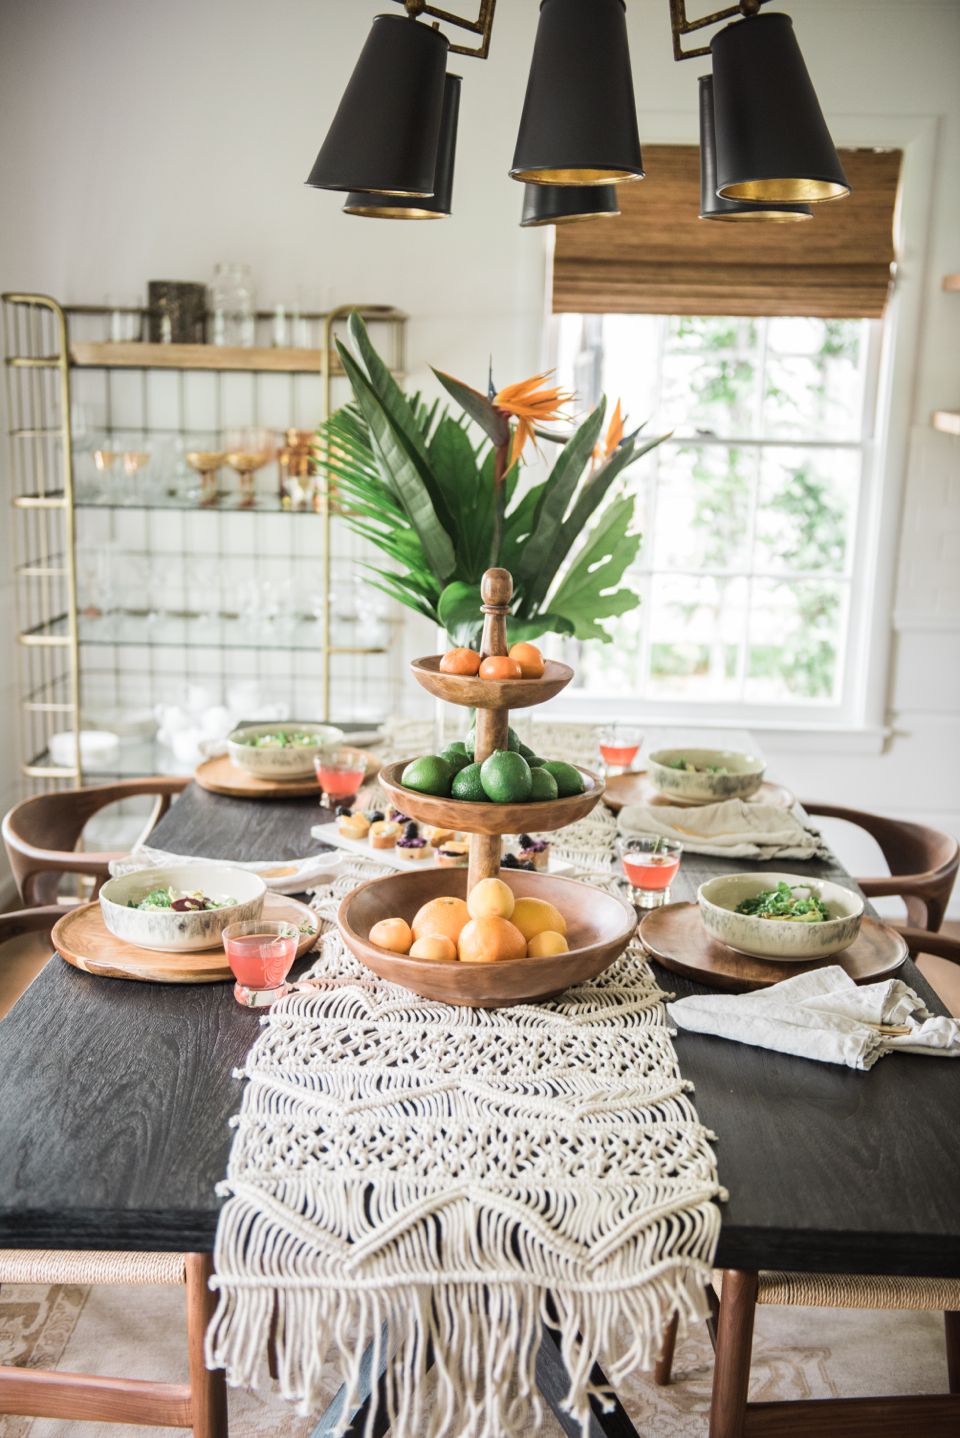 A Fresh Look at Classic Decor and Table Settings